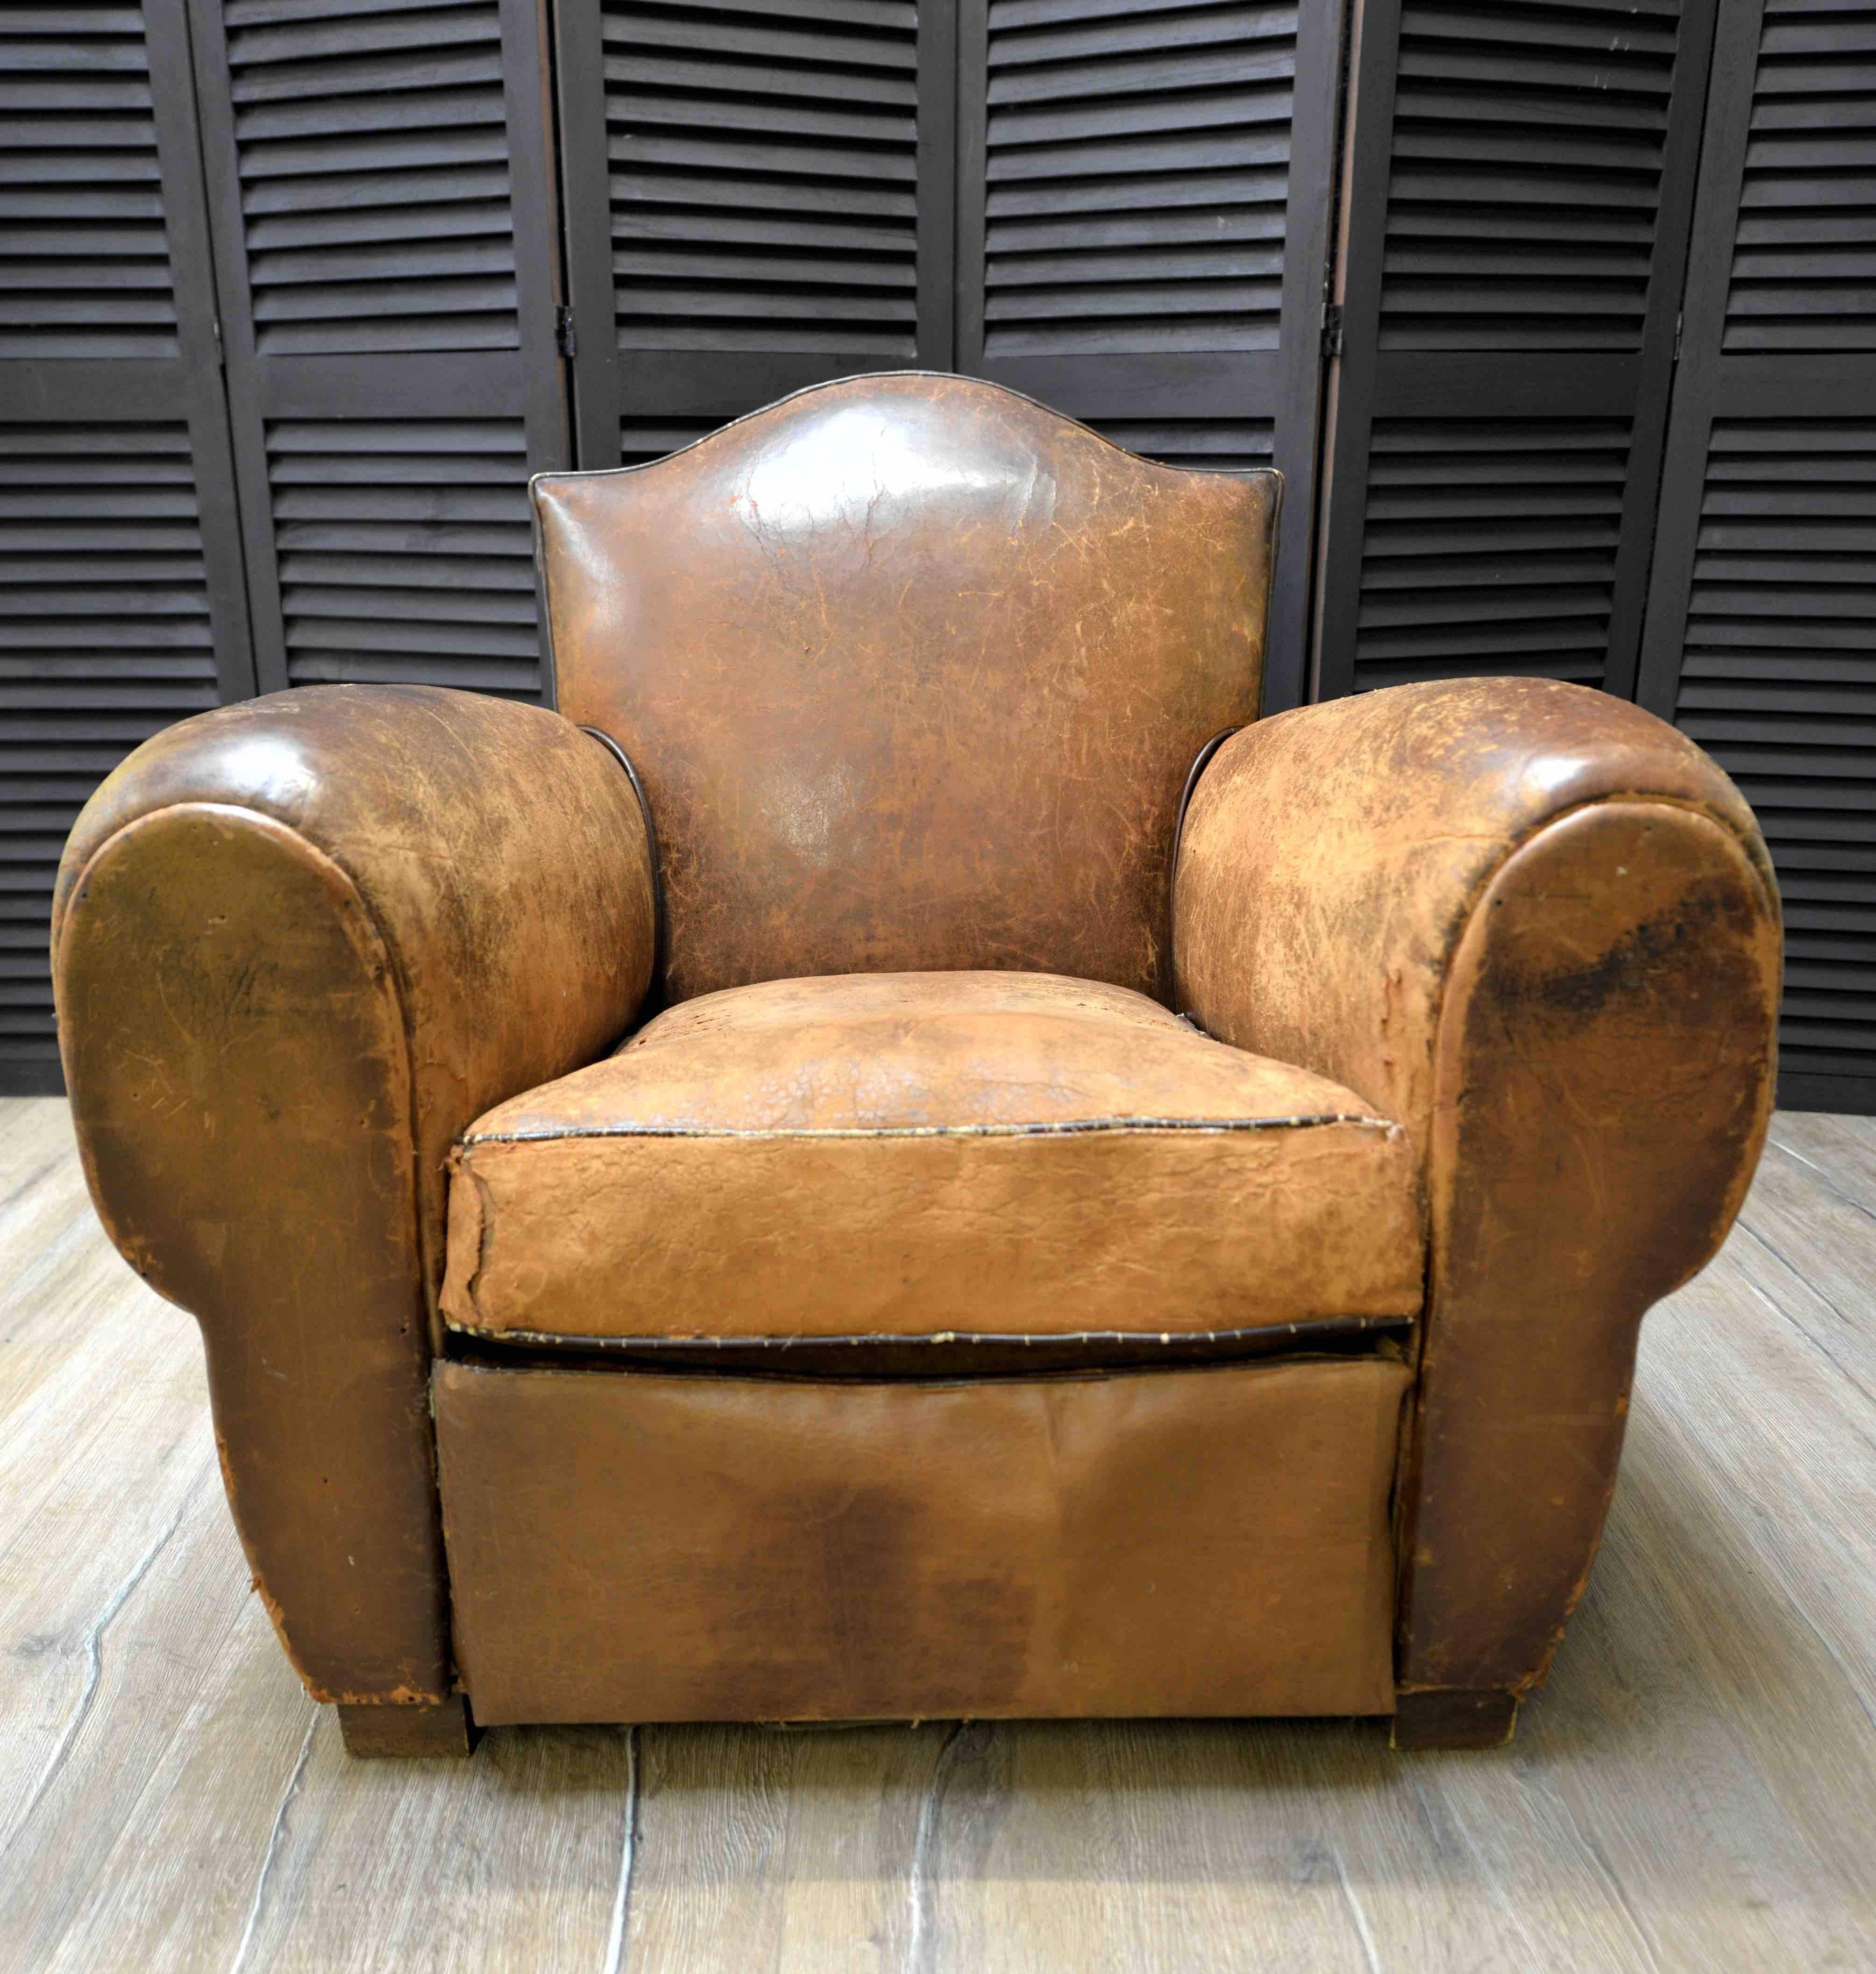 If shipped to the US or EU, no import tax applies.  

With its dramatic curves, this original Art Deco French leather club chair features a deep comfortable seat. Inspired by Rococo of the 18th century France, this design was born during the Art